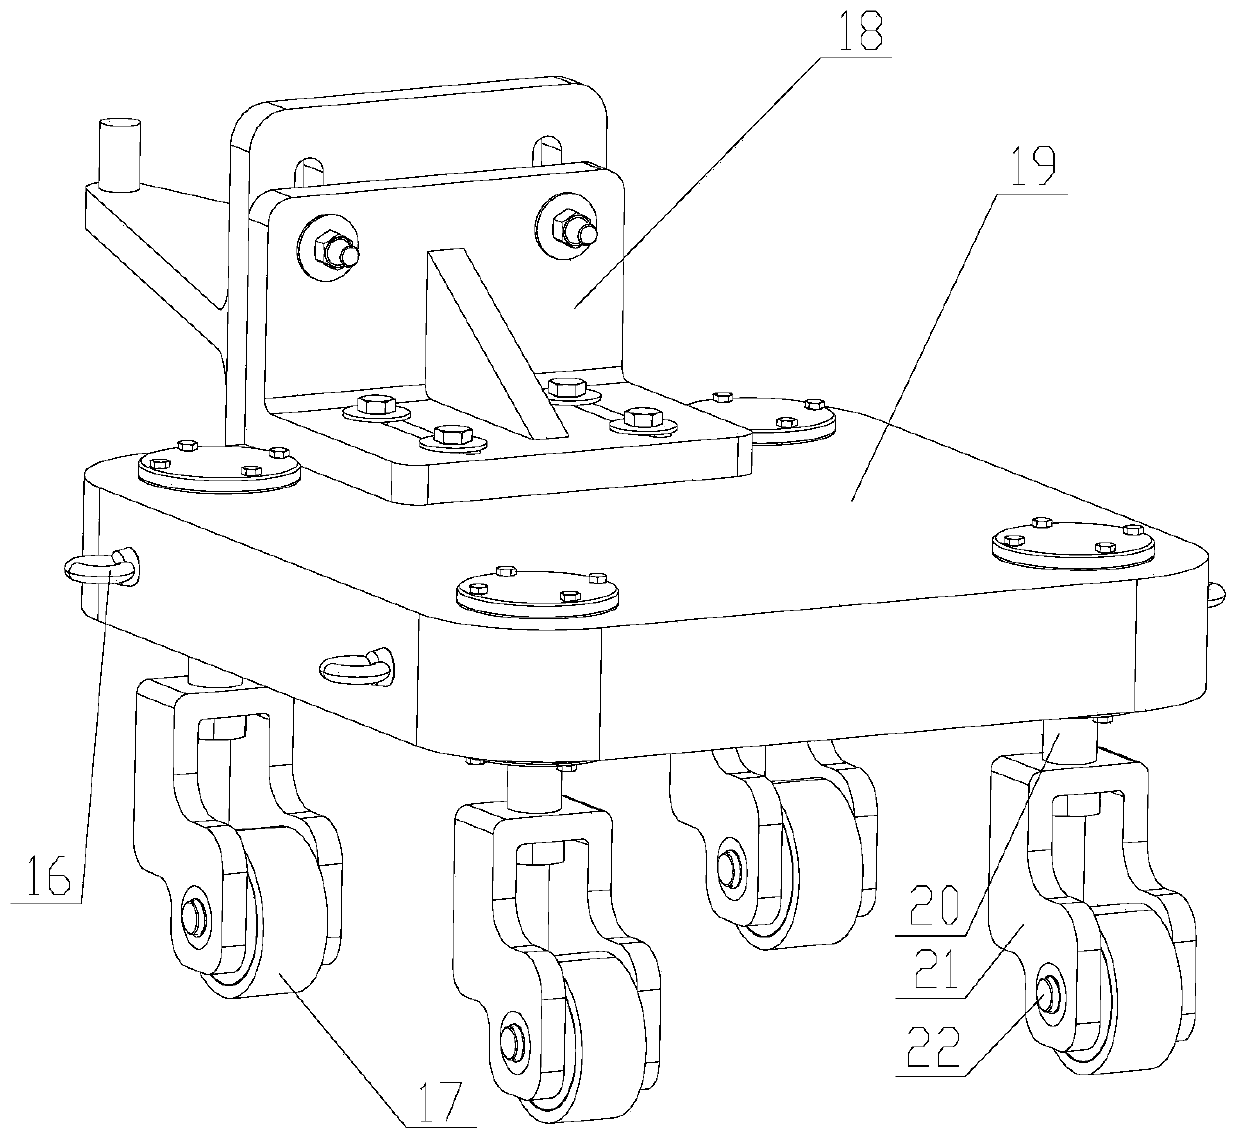 Variable-structure rope traction parallel robot for automobile collision test